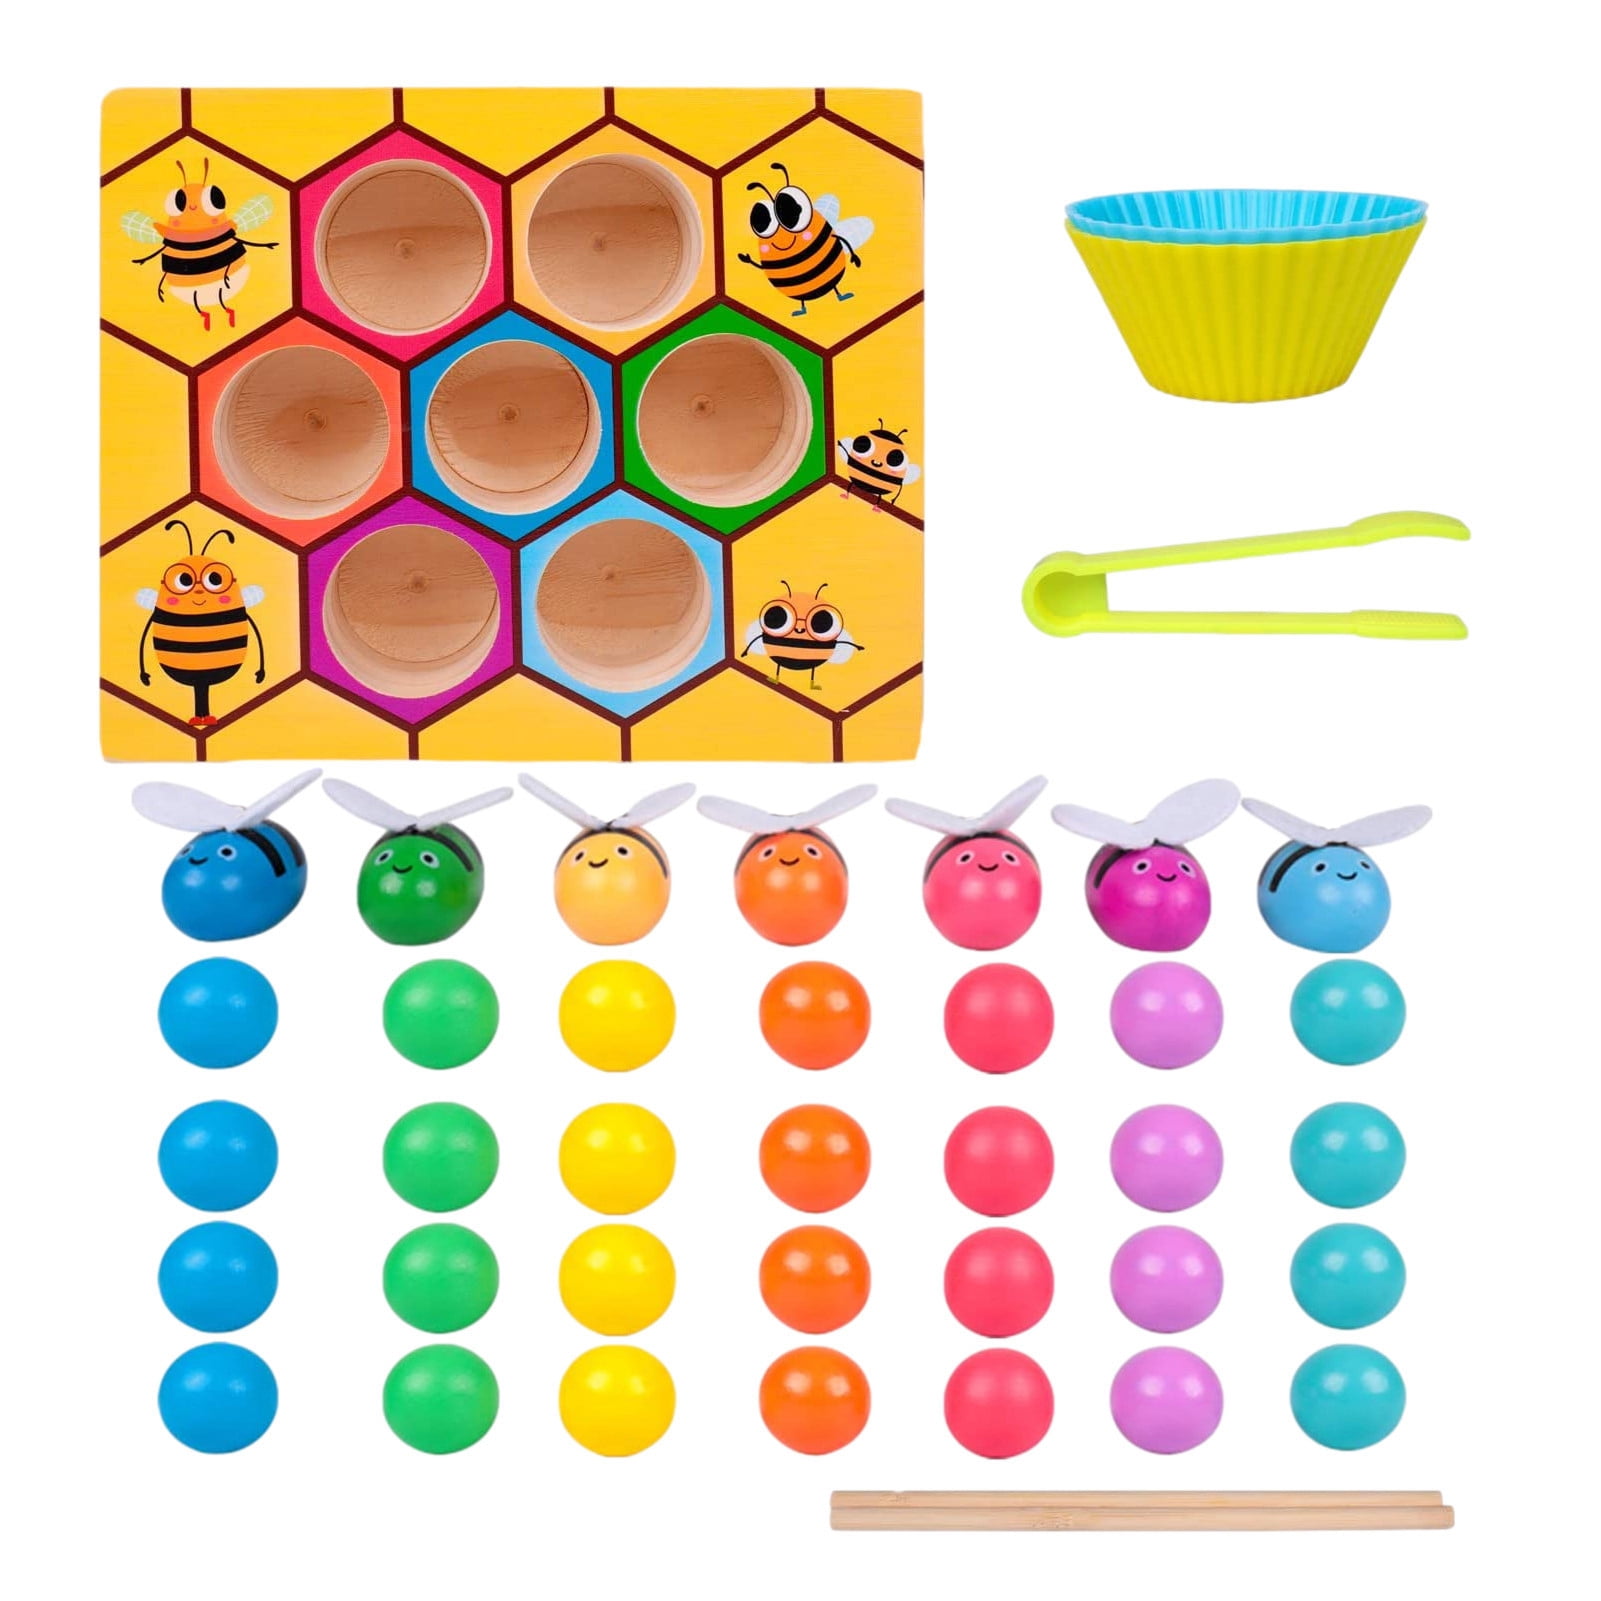 Details about   Montessori Educational Concentration Game Training Fine Motor Activities